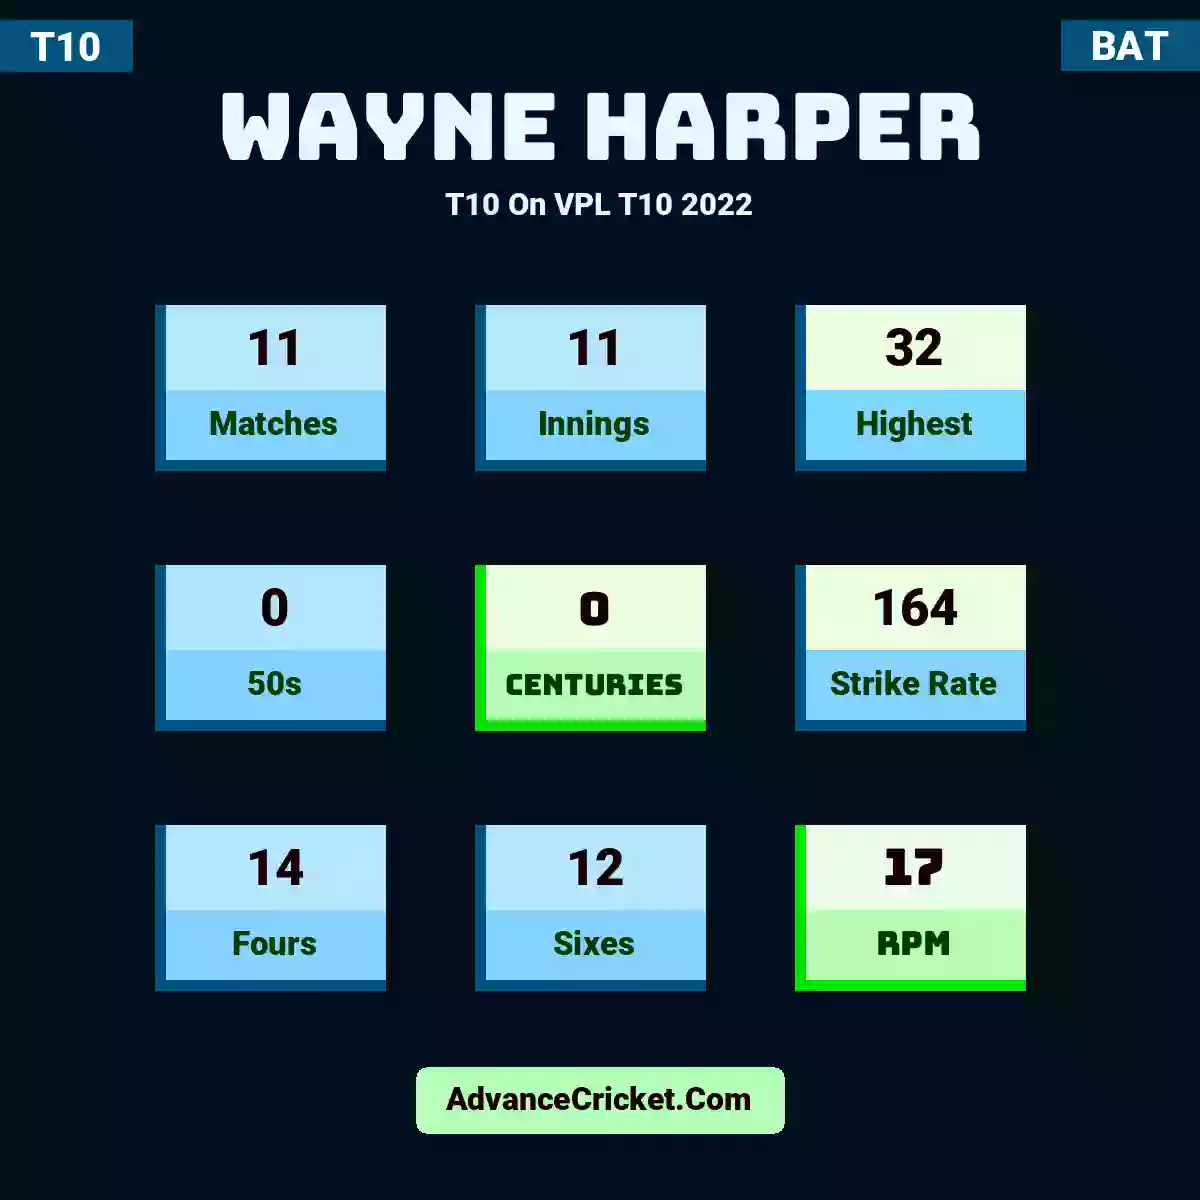 Wayne Harper T10  On VPL T10 2022, Wayne Harper played 11 matches, scored 32 runs as highest, 0 half-centuries, and 0 centuries, with a strike rate of 164. W.Harper hit 14 fours and 12 sixes, with an RPM of 17.